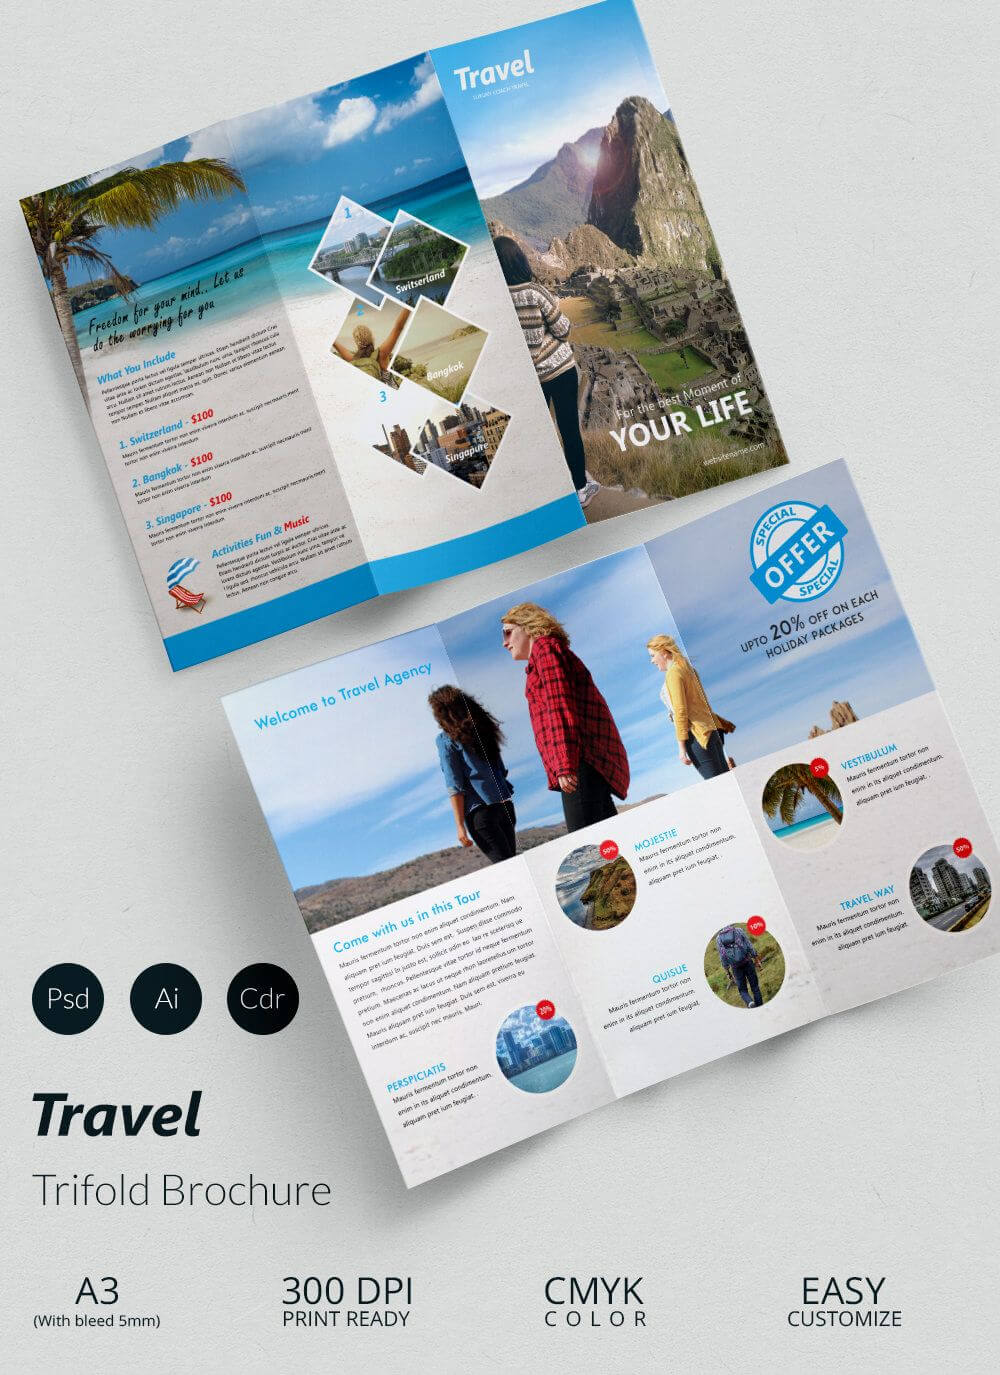 52+ Travel Brochure Templates – Psd, Ai | Travel Brochure With Regard To Travel And Tourism Brochure Templates Free